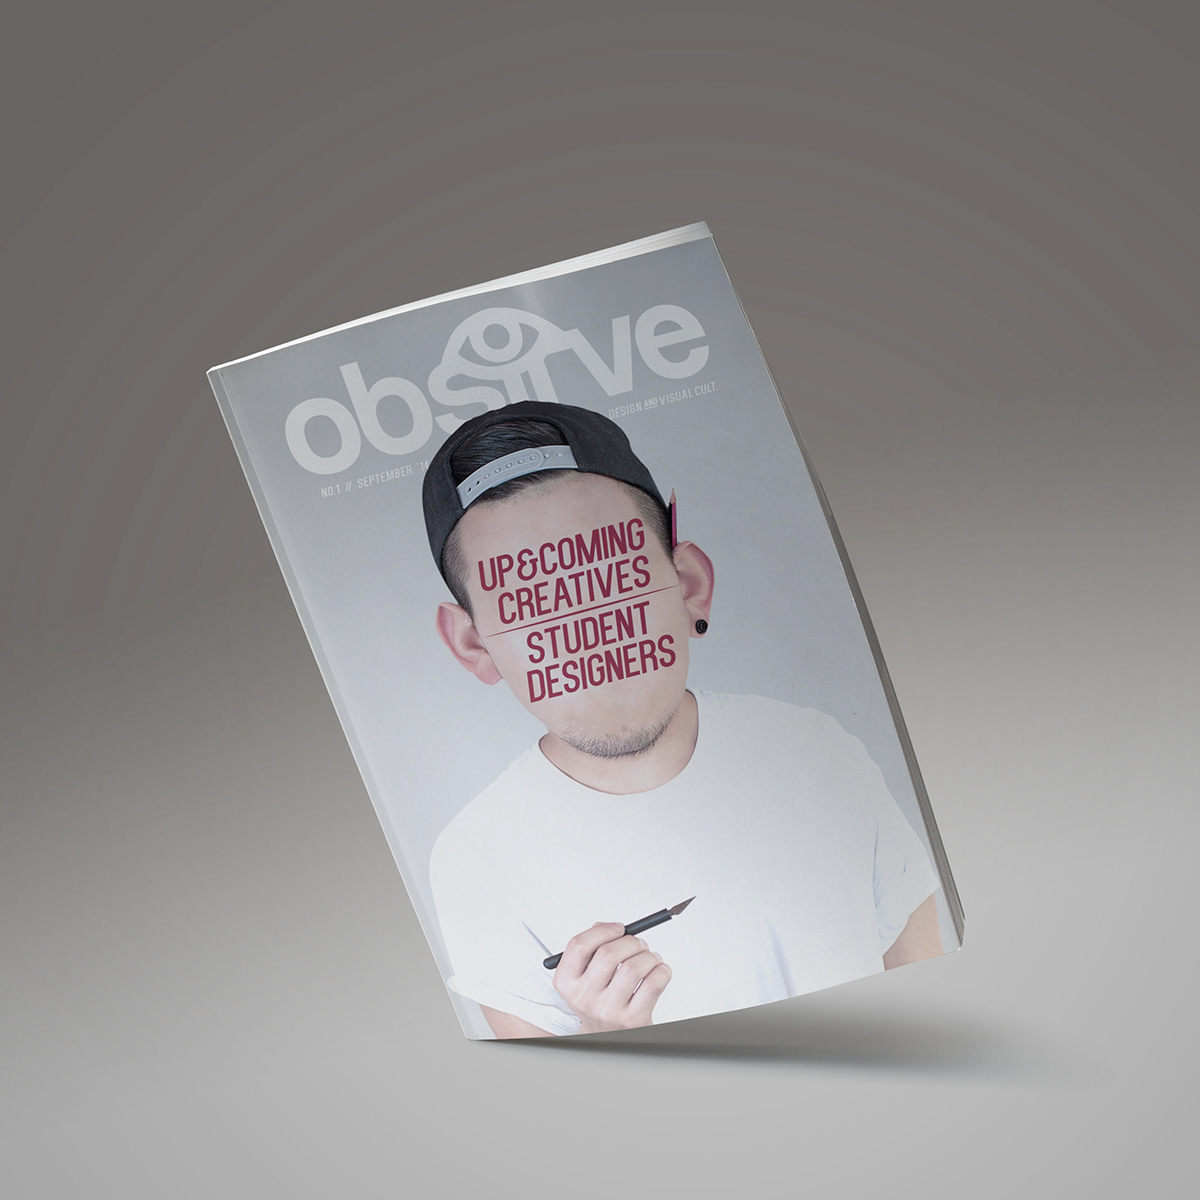 magazine Layout magazine cover obsirve Observe eye editorial RMIT Magazine design see book retouch student brand